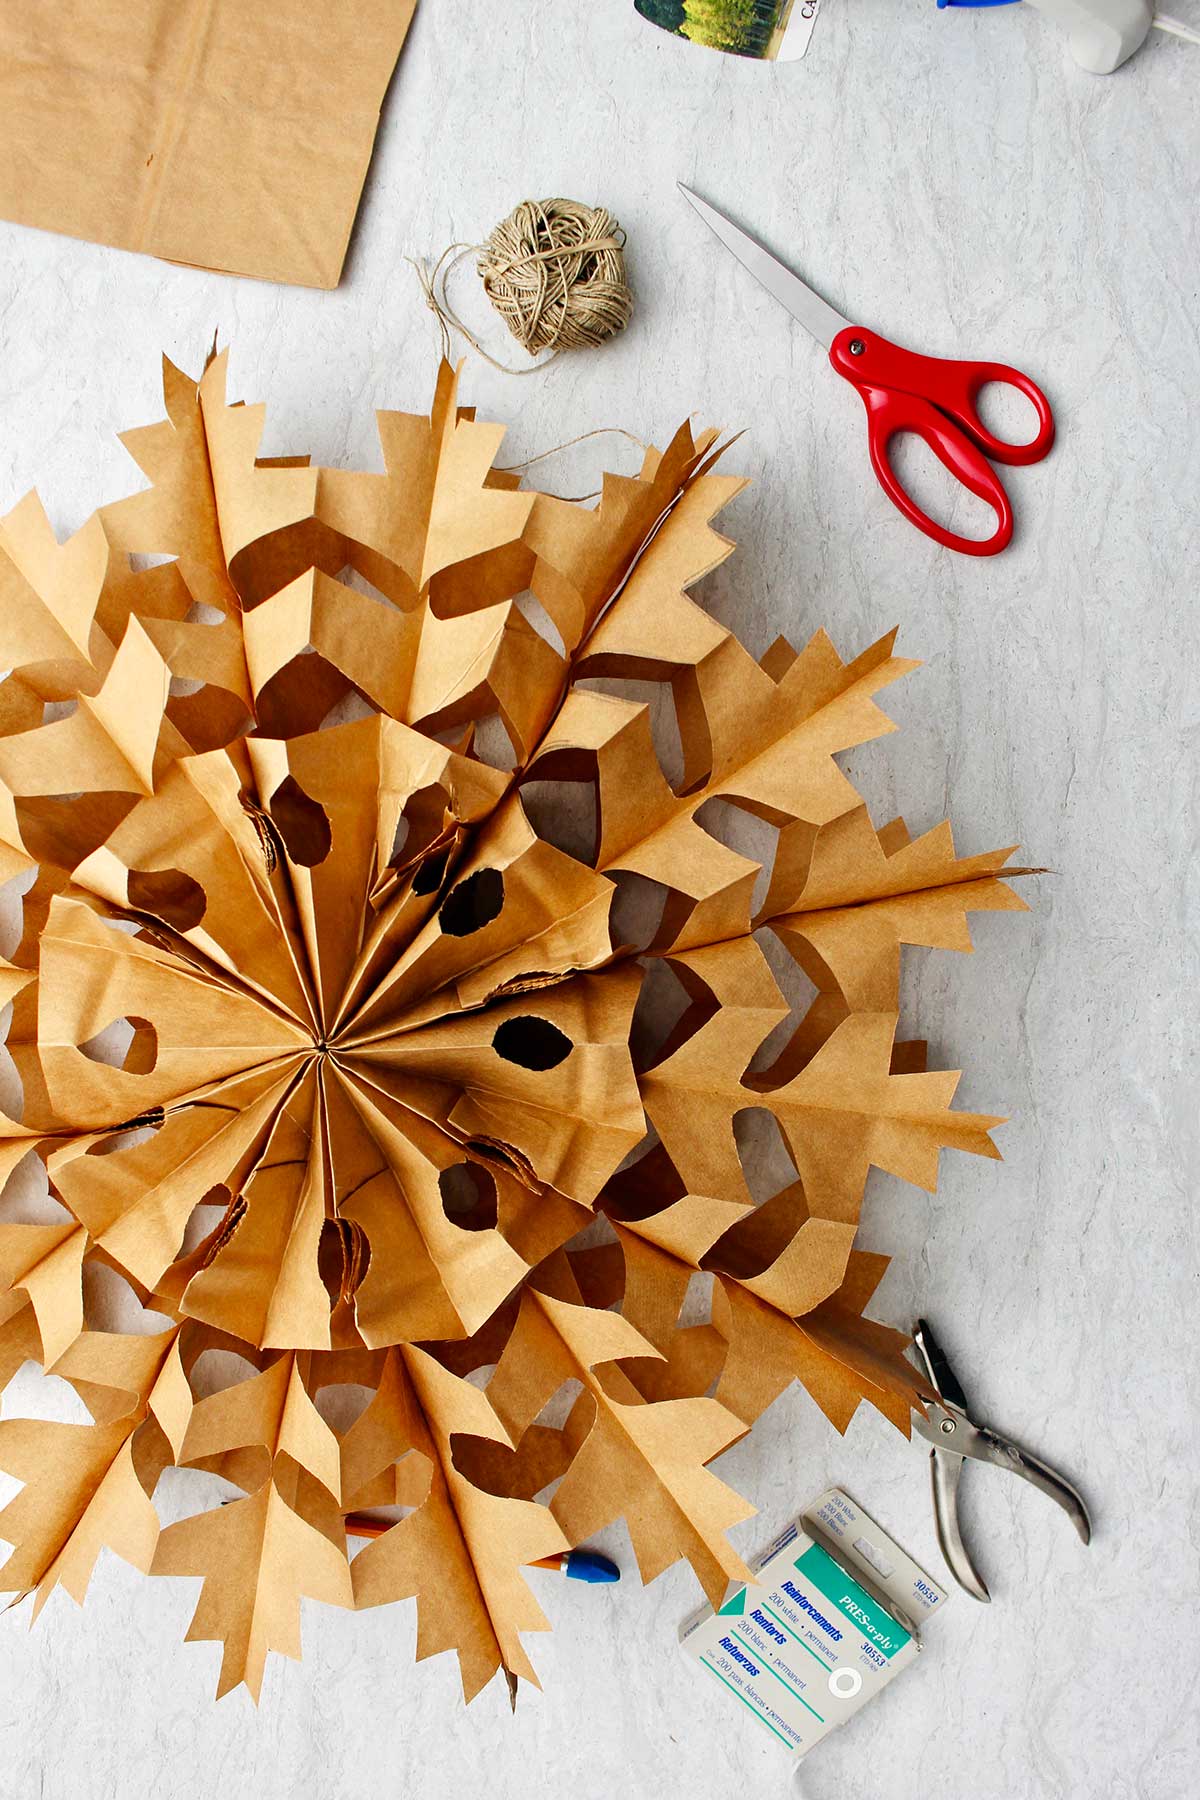 Completed brown paper bag snowflake with supplies near by.